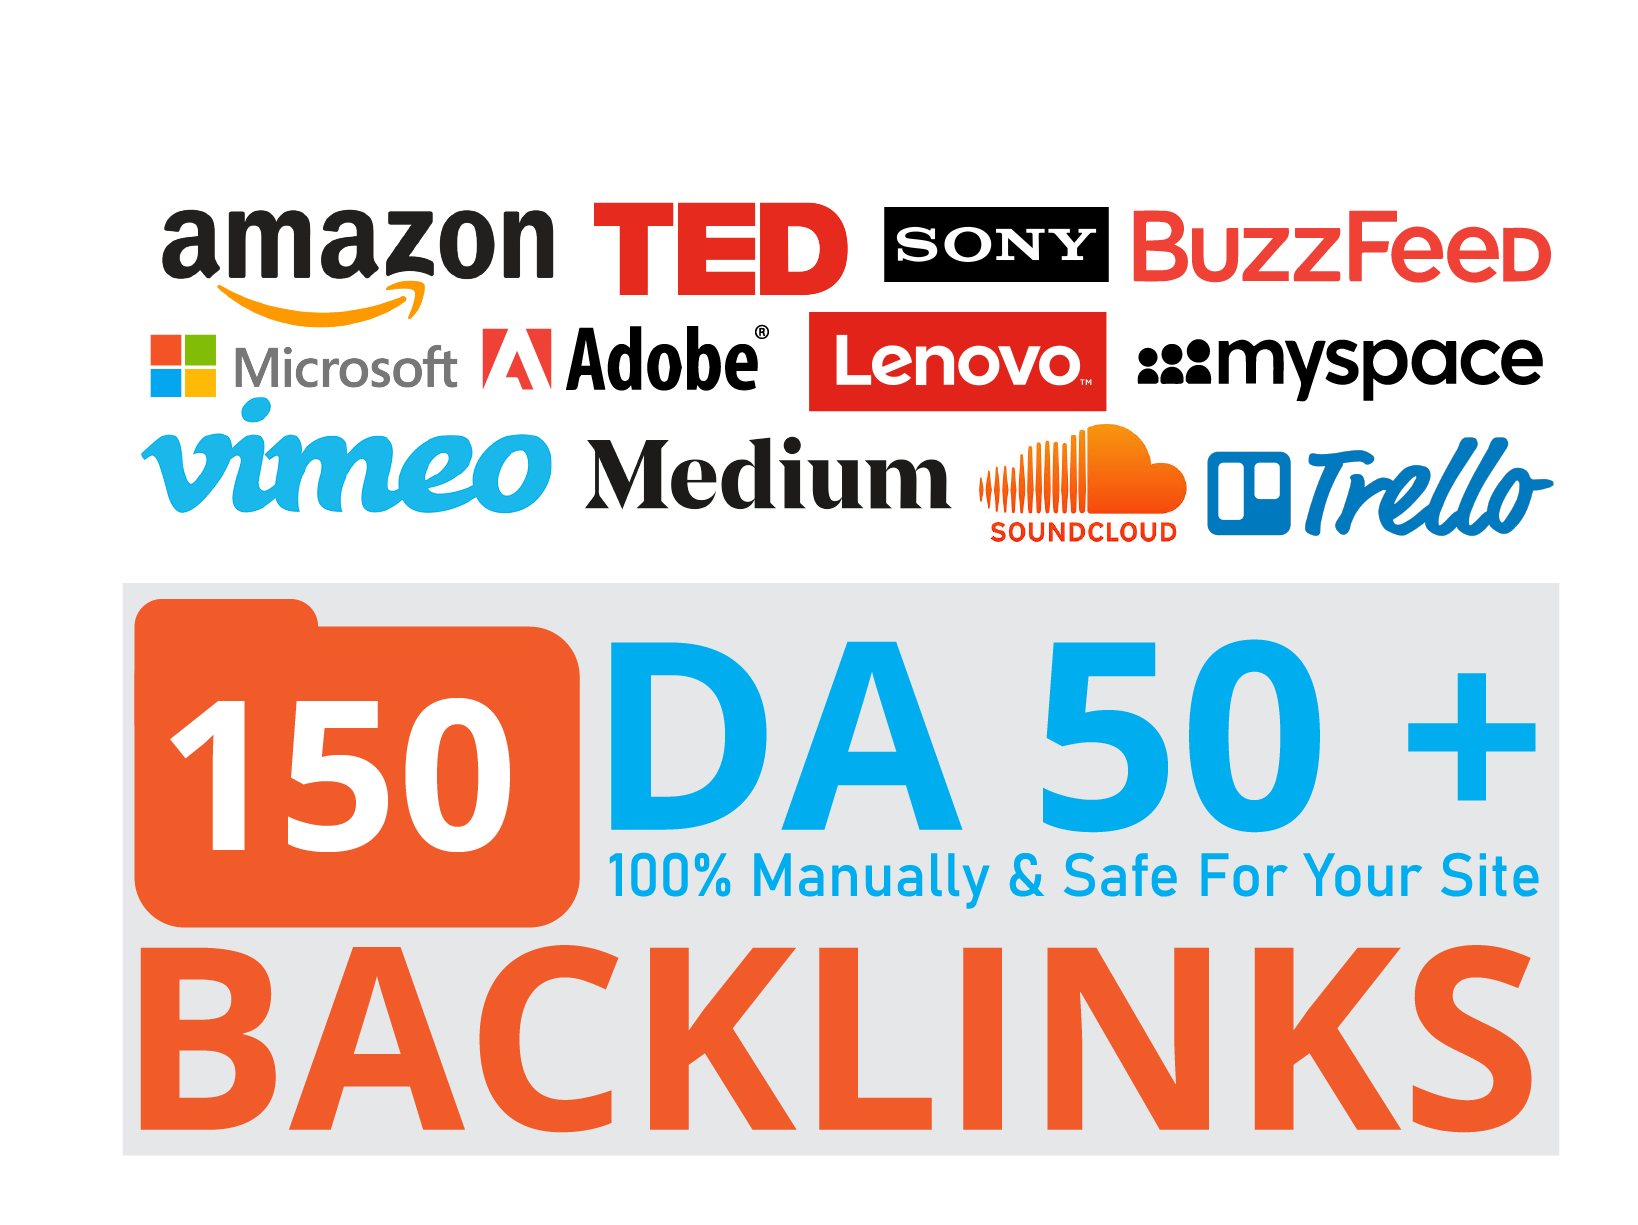 150 Big Brand Companies Backlinks Give Your Site HUGE Boost With DA 100 To 50